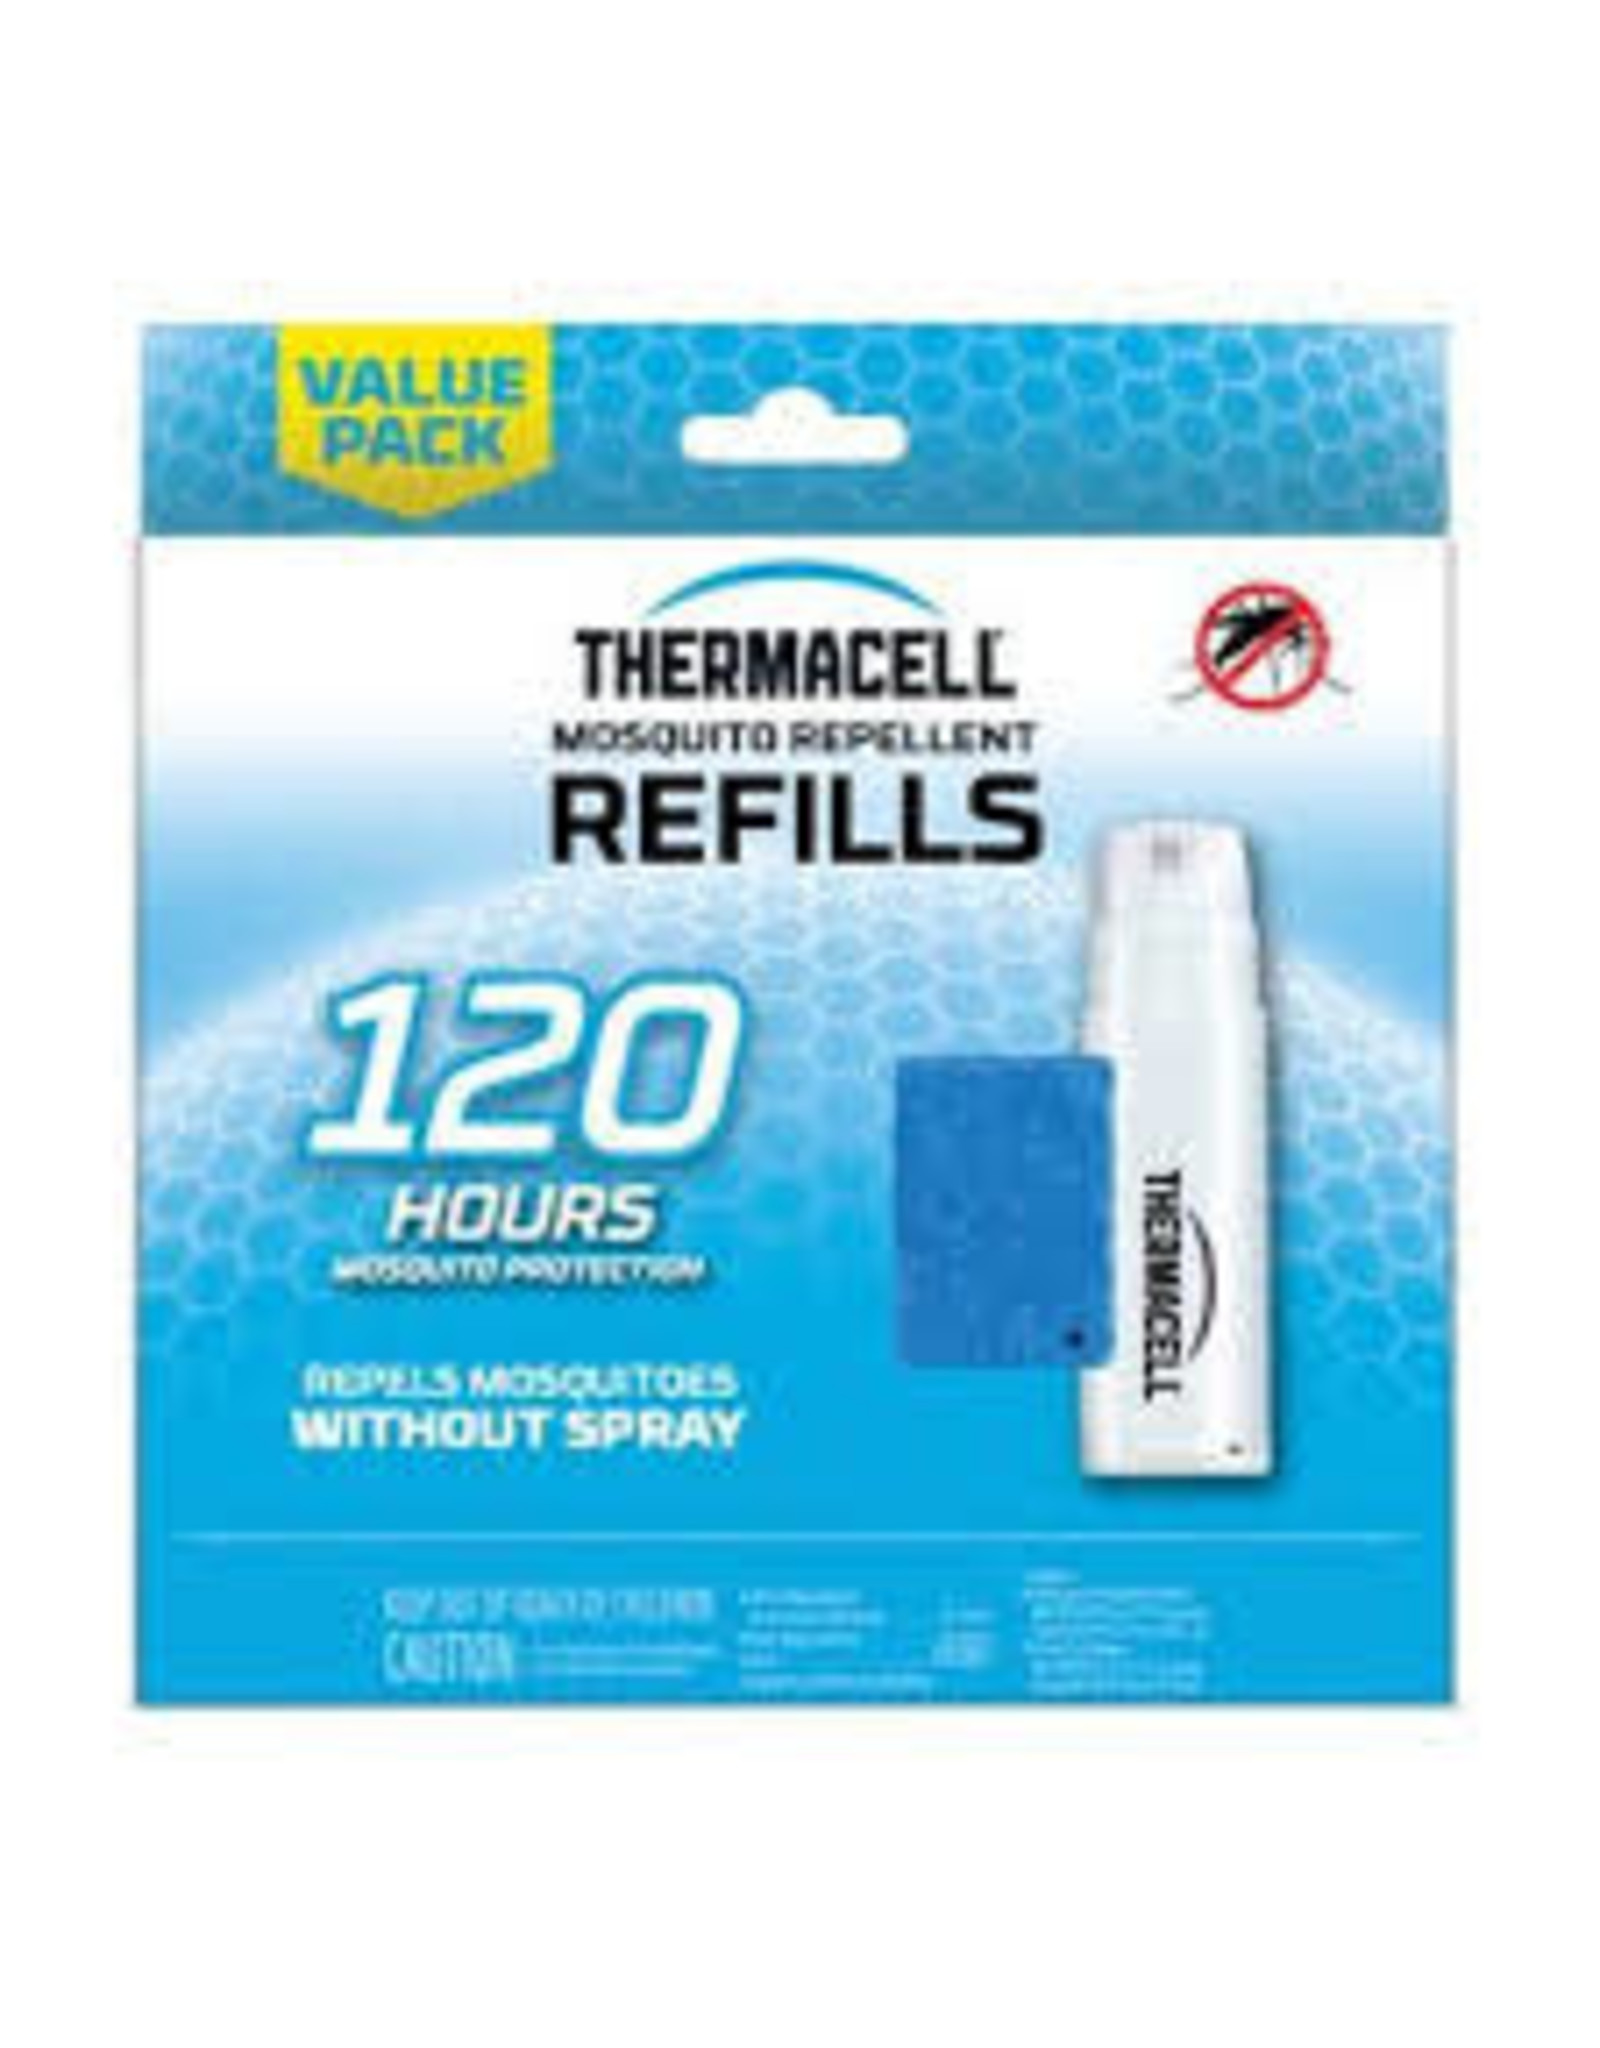 THERMACELL THERM MOSQUITO REPELLENT REFILLS 120HR